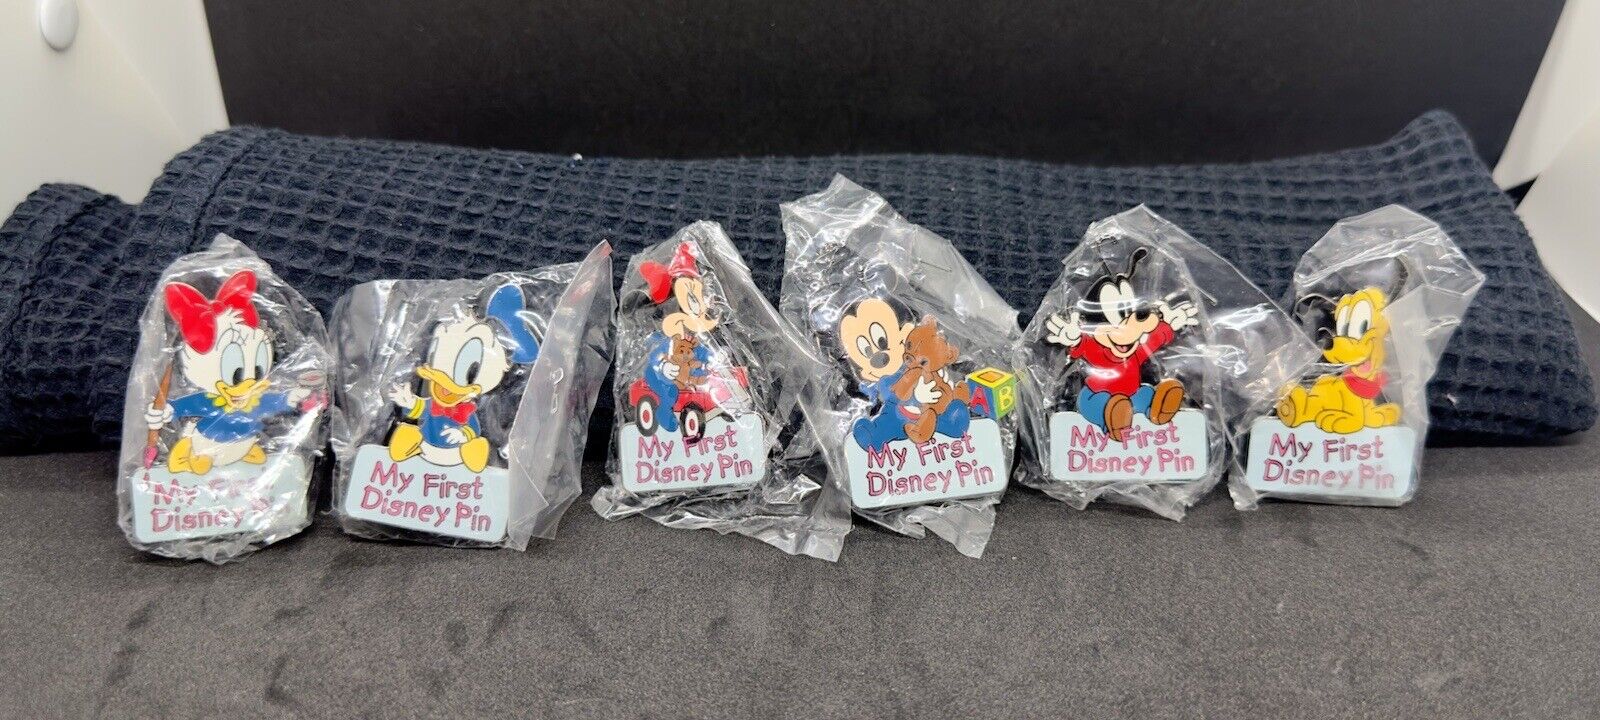 New My first Disney pin set All The Disney Babies